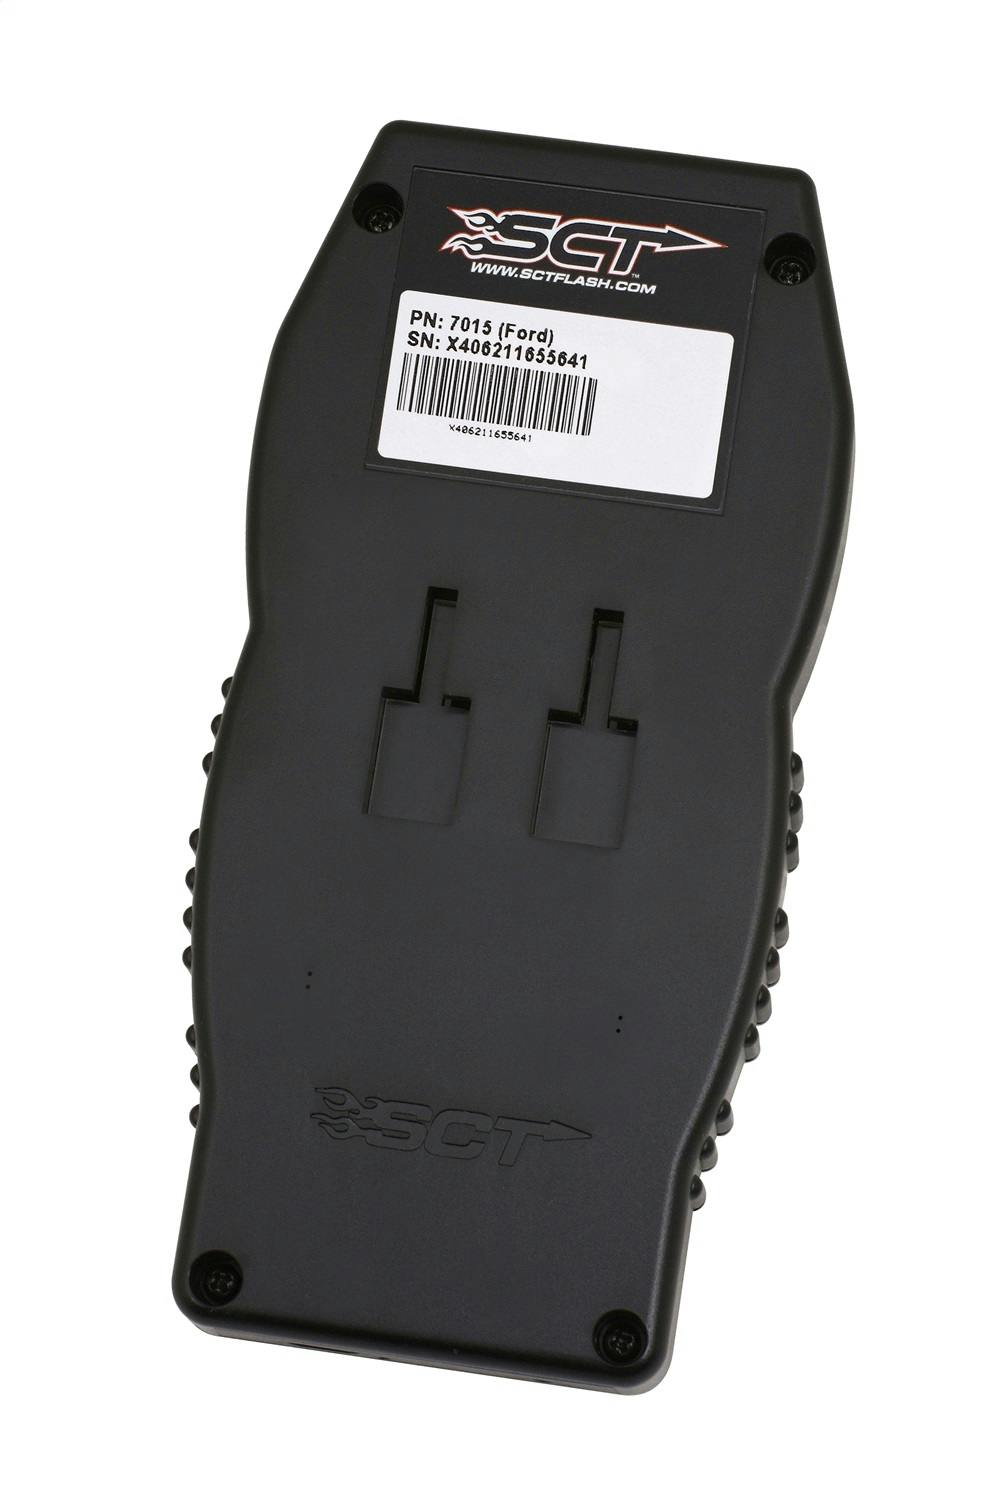 sct x4 power flash programmer preloaded with custom tunes